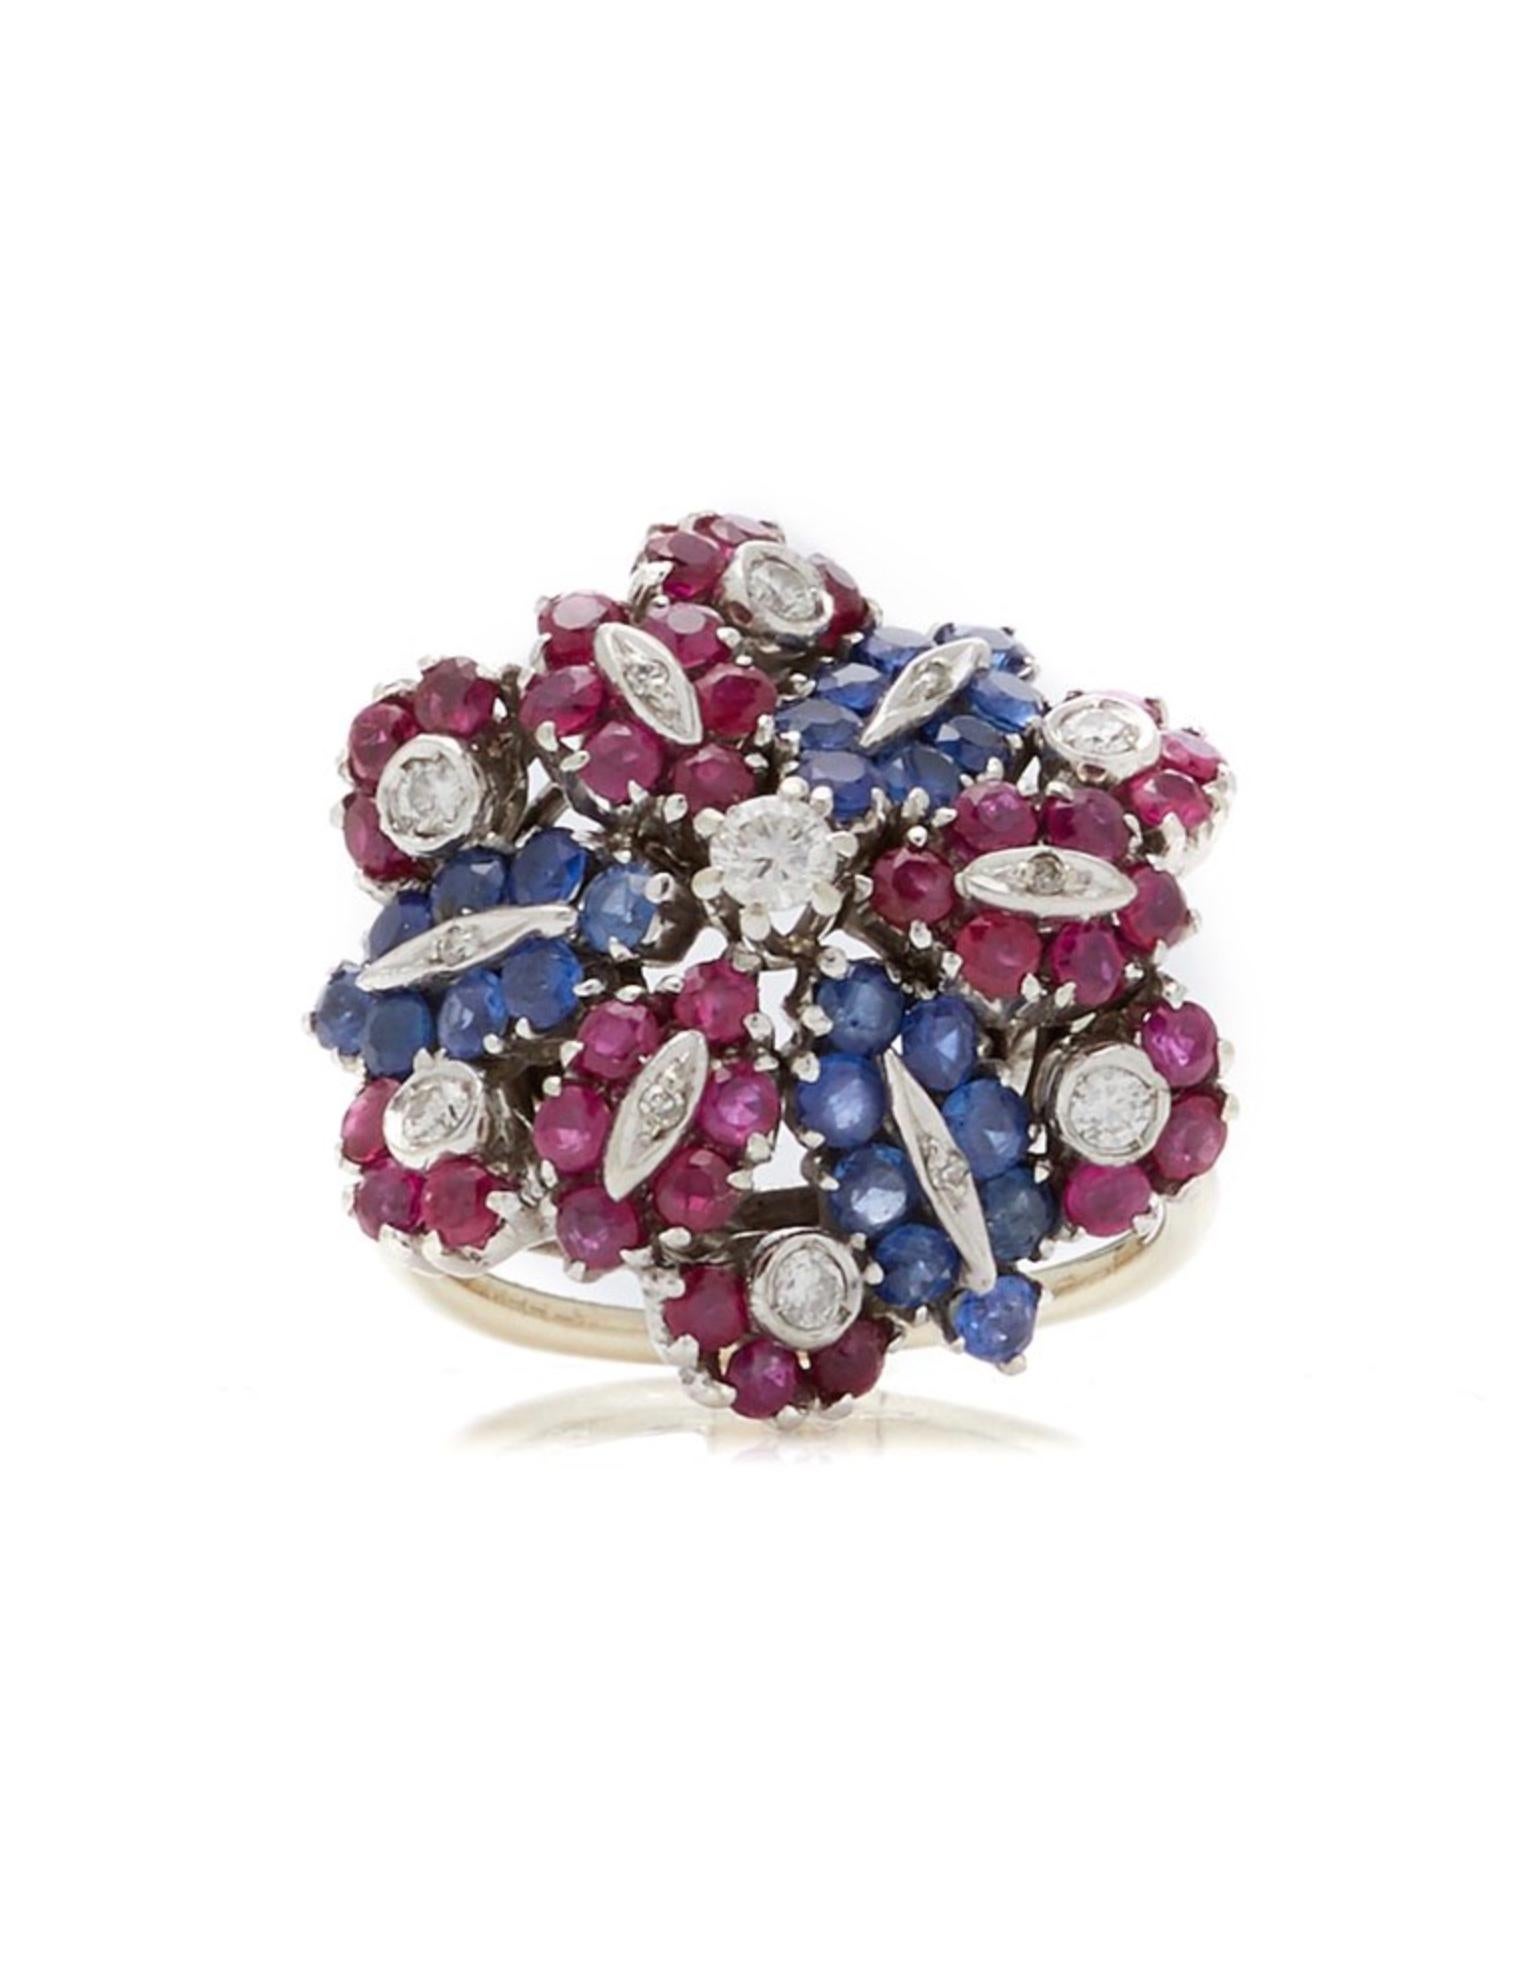 A chic retro flower ring embellished with rubies, sapphires, and diamonds, set in white gold. 